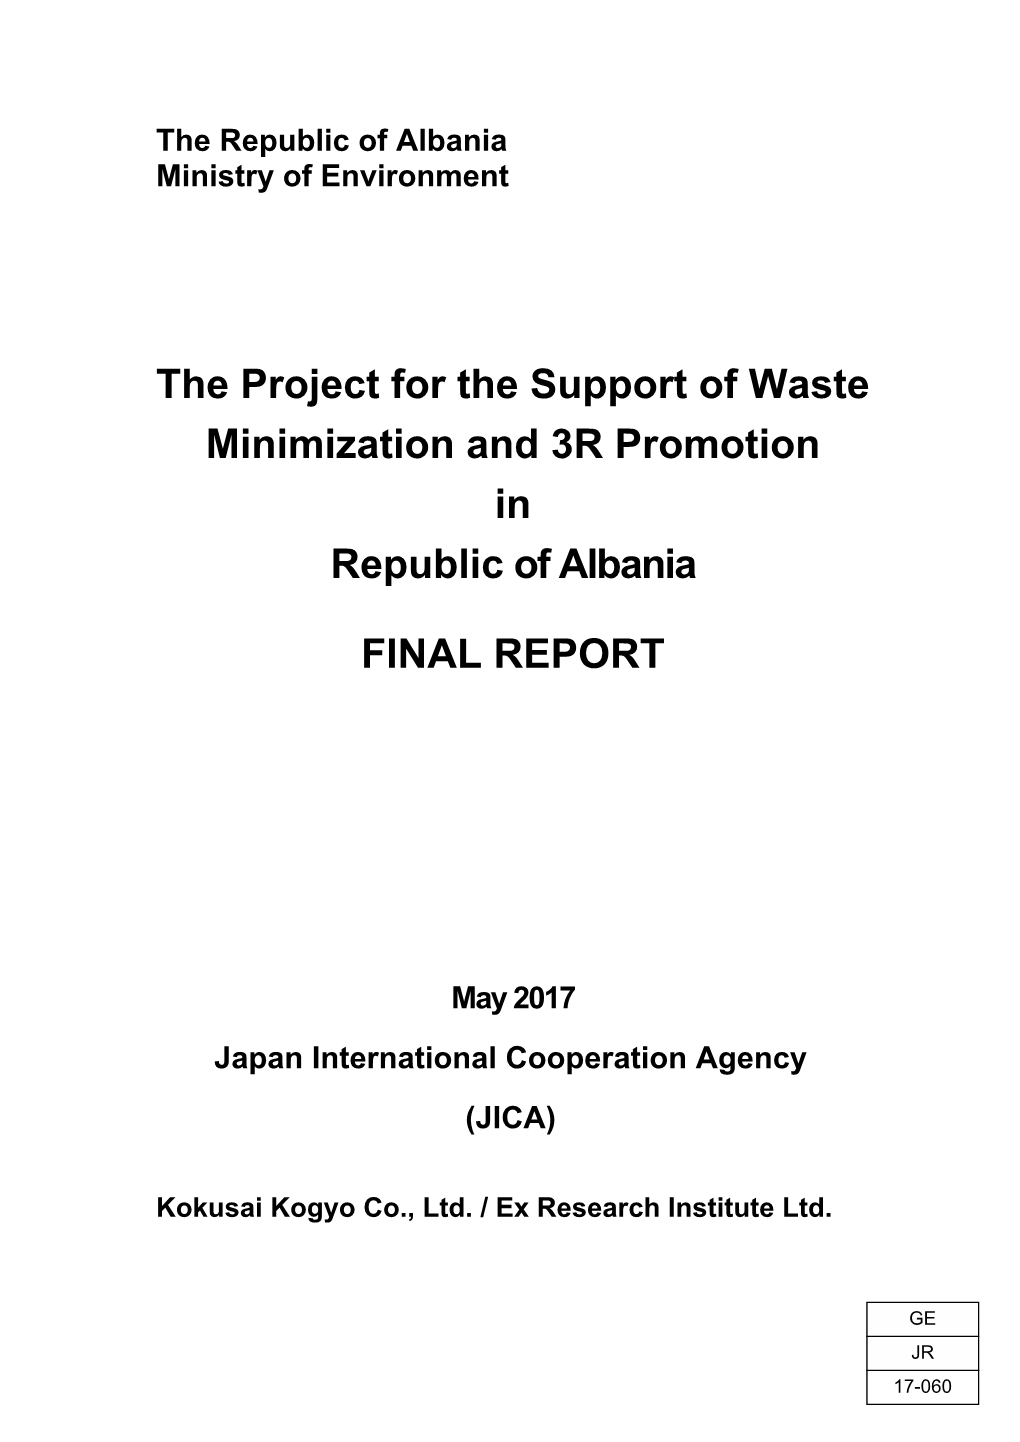 The Project for the Support of Waste Minimization and 3R Promotion in Republic of Albania